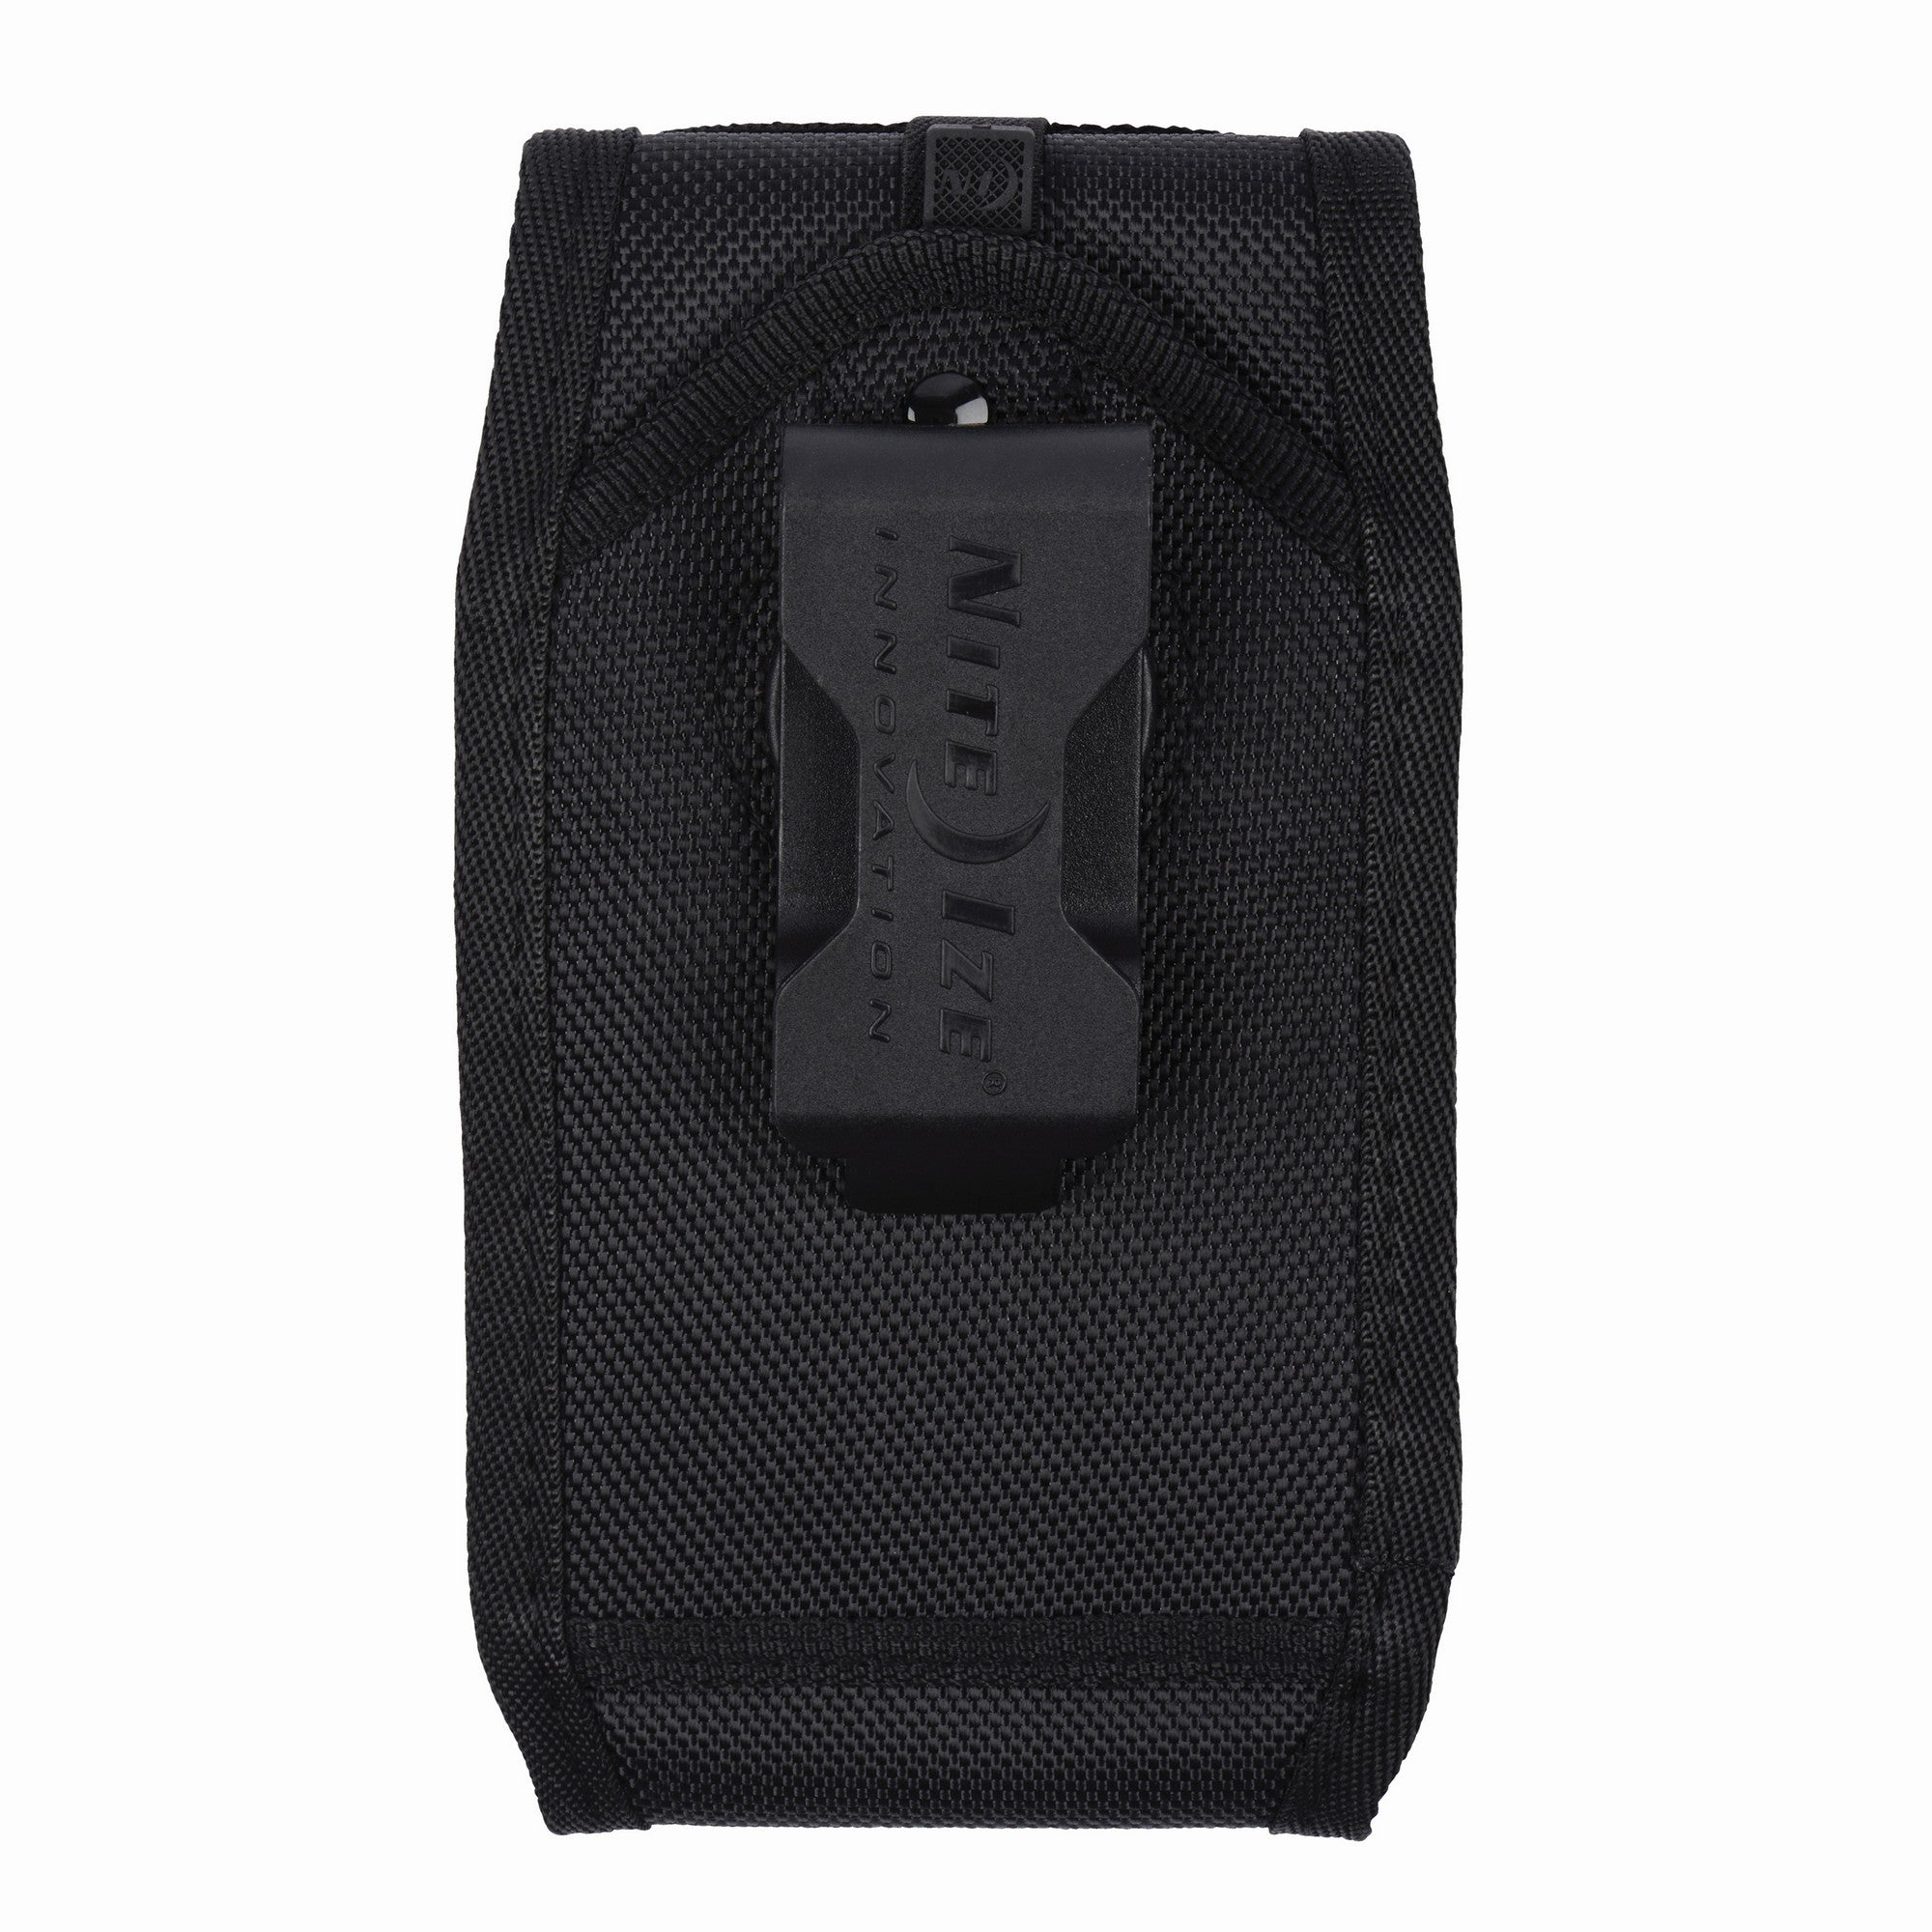 Universal Nite Ize Black Rugged Clip Case Cargo - Extra Tall - 15-01330